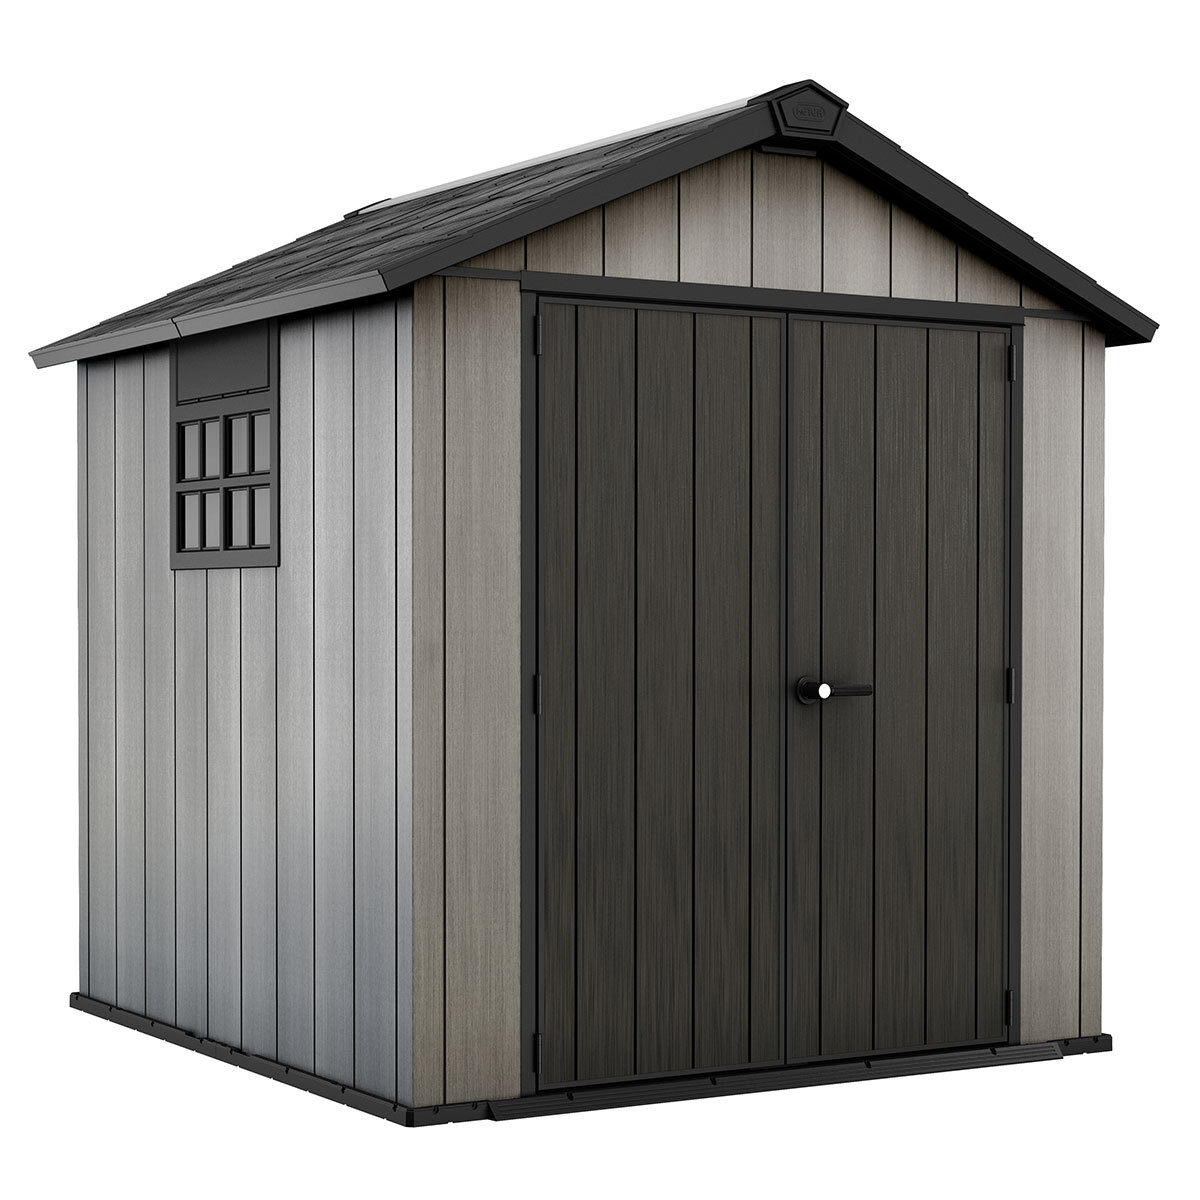 Keter Oakland 7ft 6" x 7ft (2.3 x 2.1m) Storage Shed